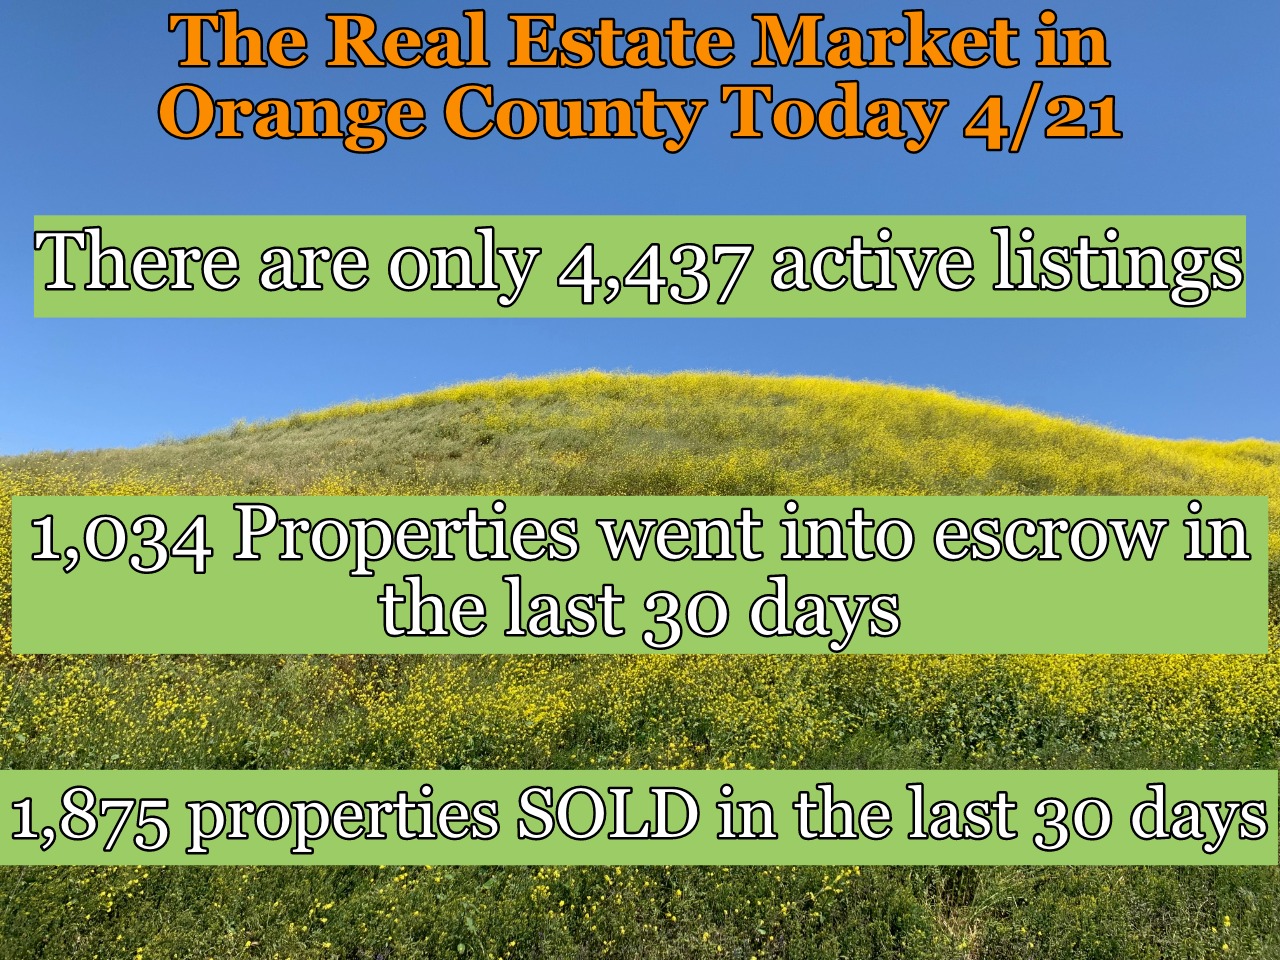 The REAL Real Estate Market Today in Orange County